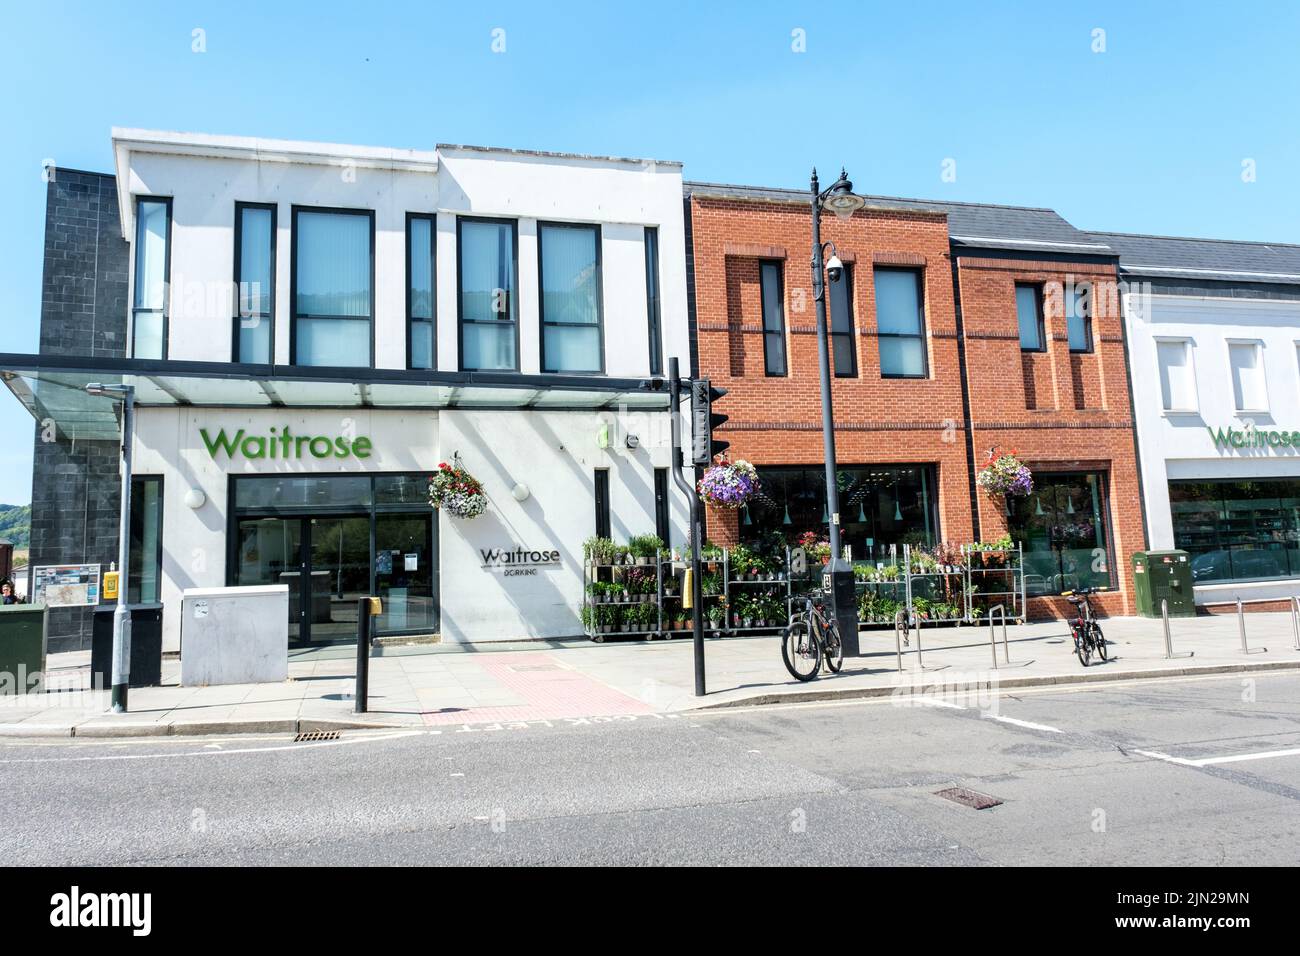 Dorking, Surrey Hills, London UK, July 07 2022, Waitrose High Street Retail Supermarket Shop Front and Sign With No People Stock Photo